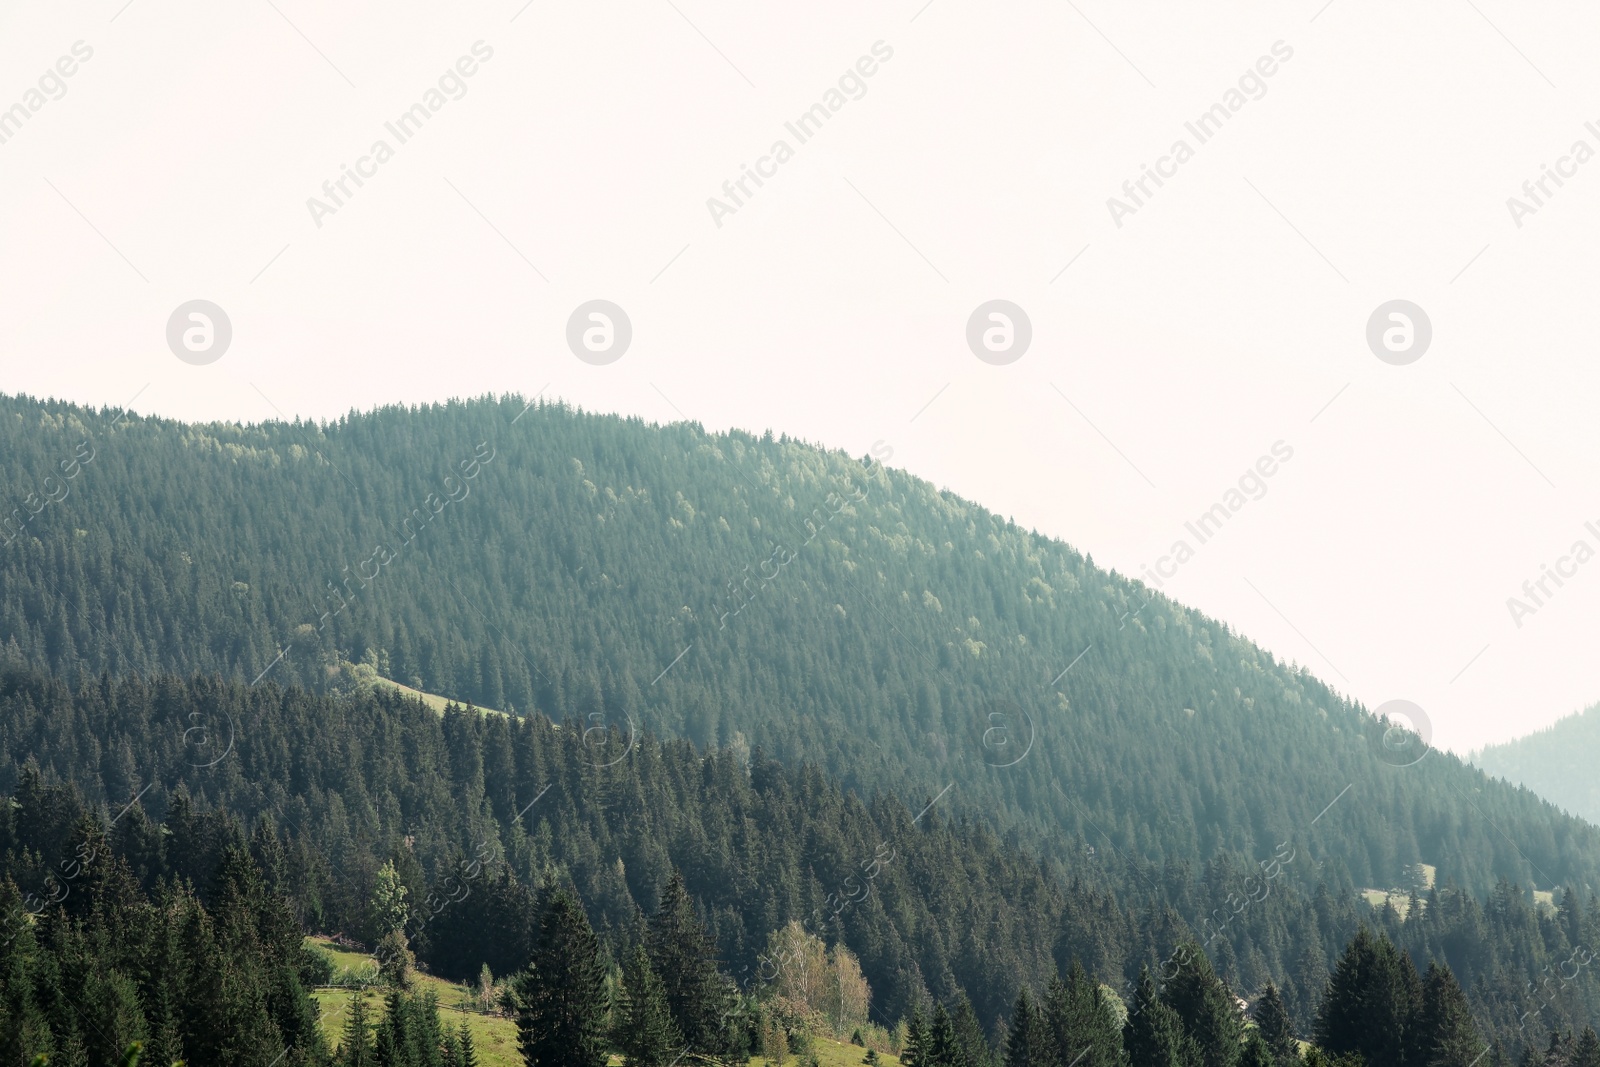 Photo of Picturesque view of evergreen forest on mountain slopes